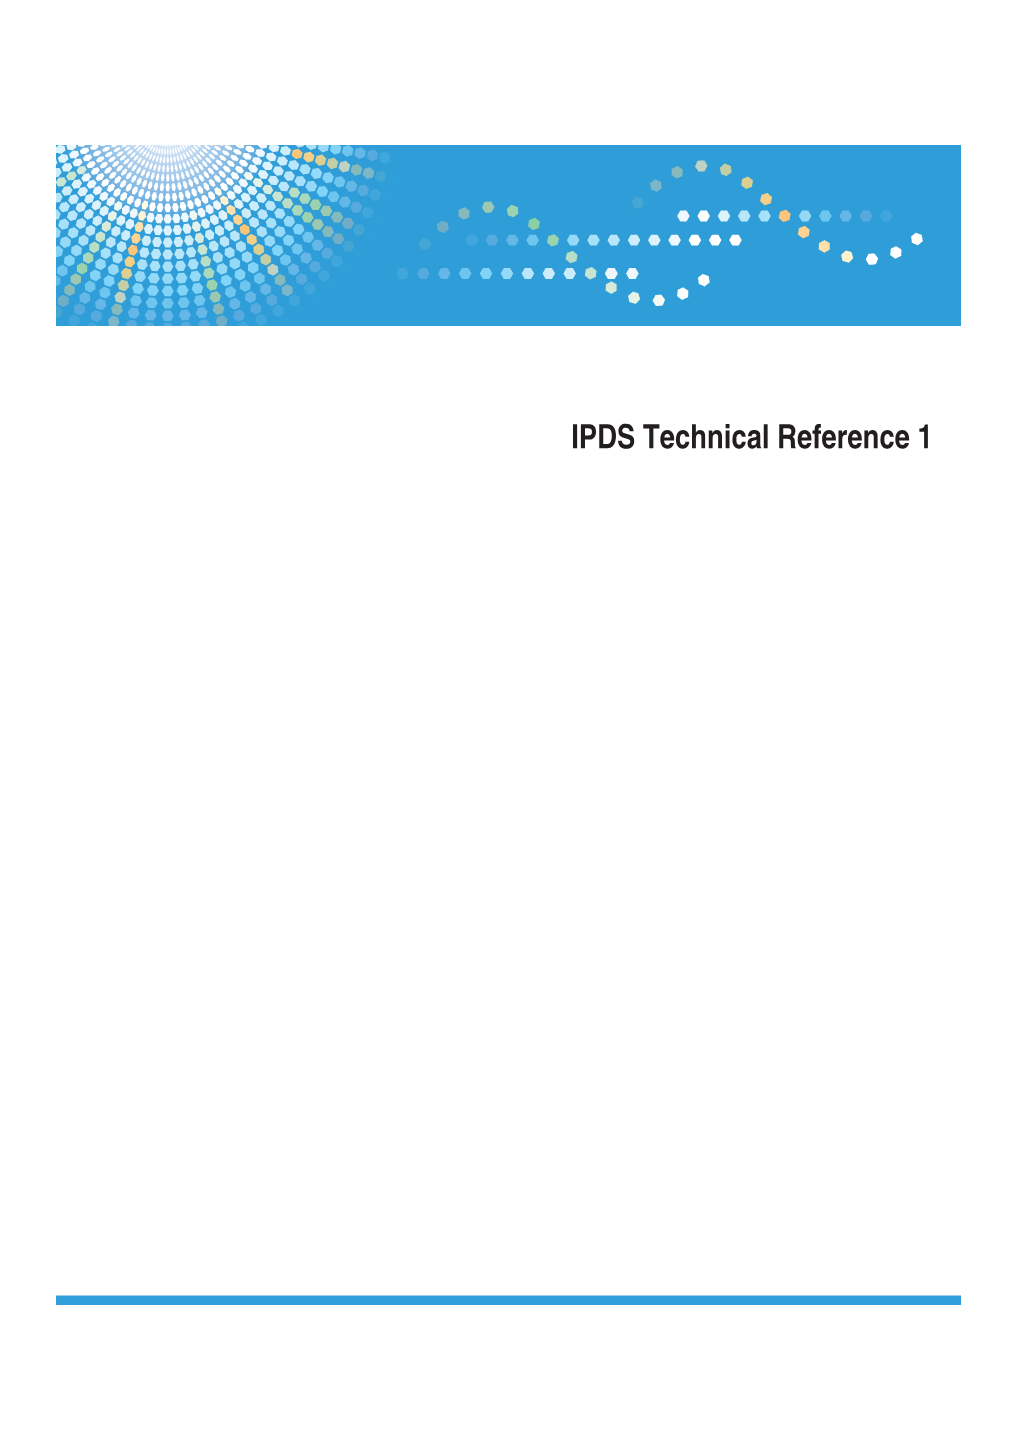 IPDS Technical Reference 1